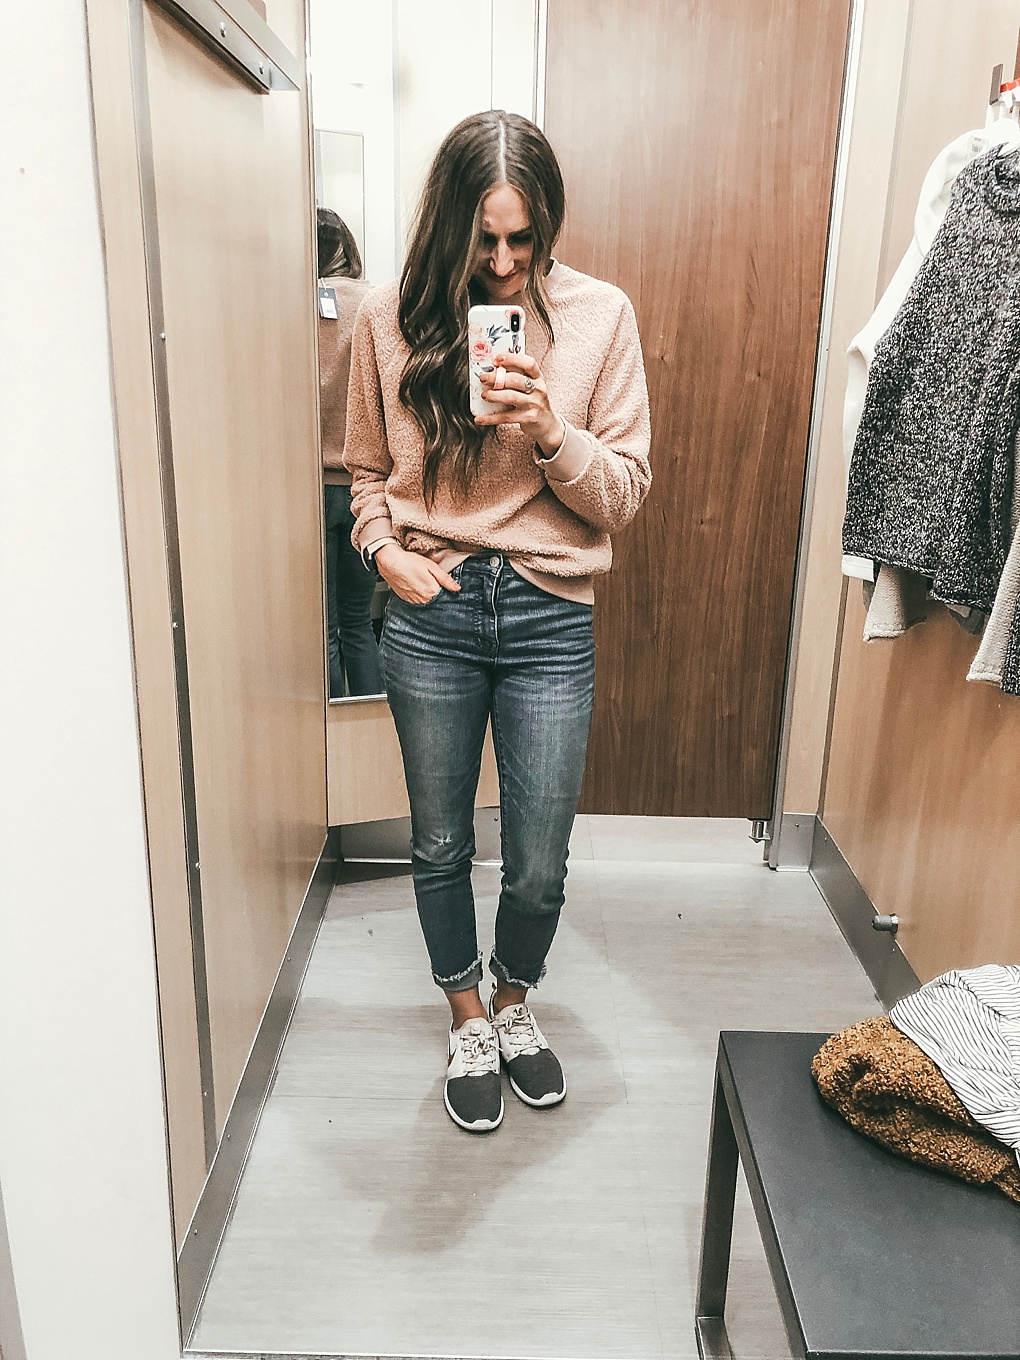 Headed to Target today? Utah Style Blogger Dani Marie is sharing her latest fashion finds in her Target try on. See her picks here!